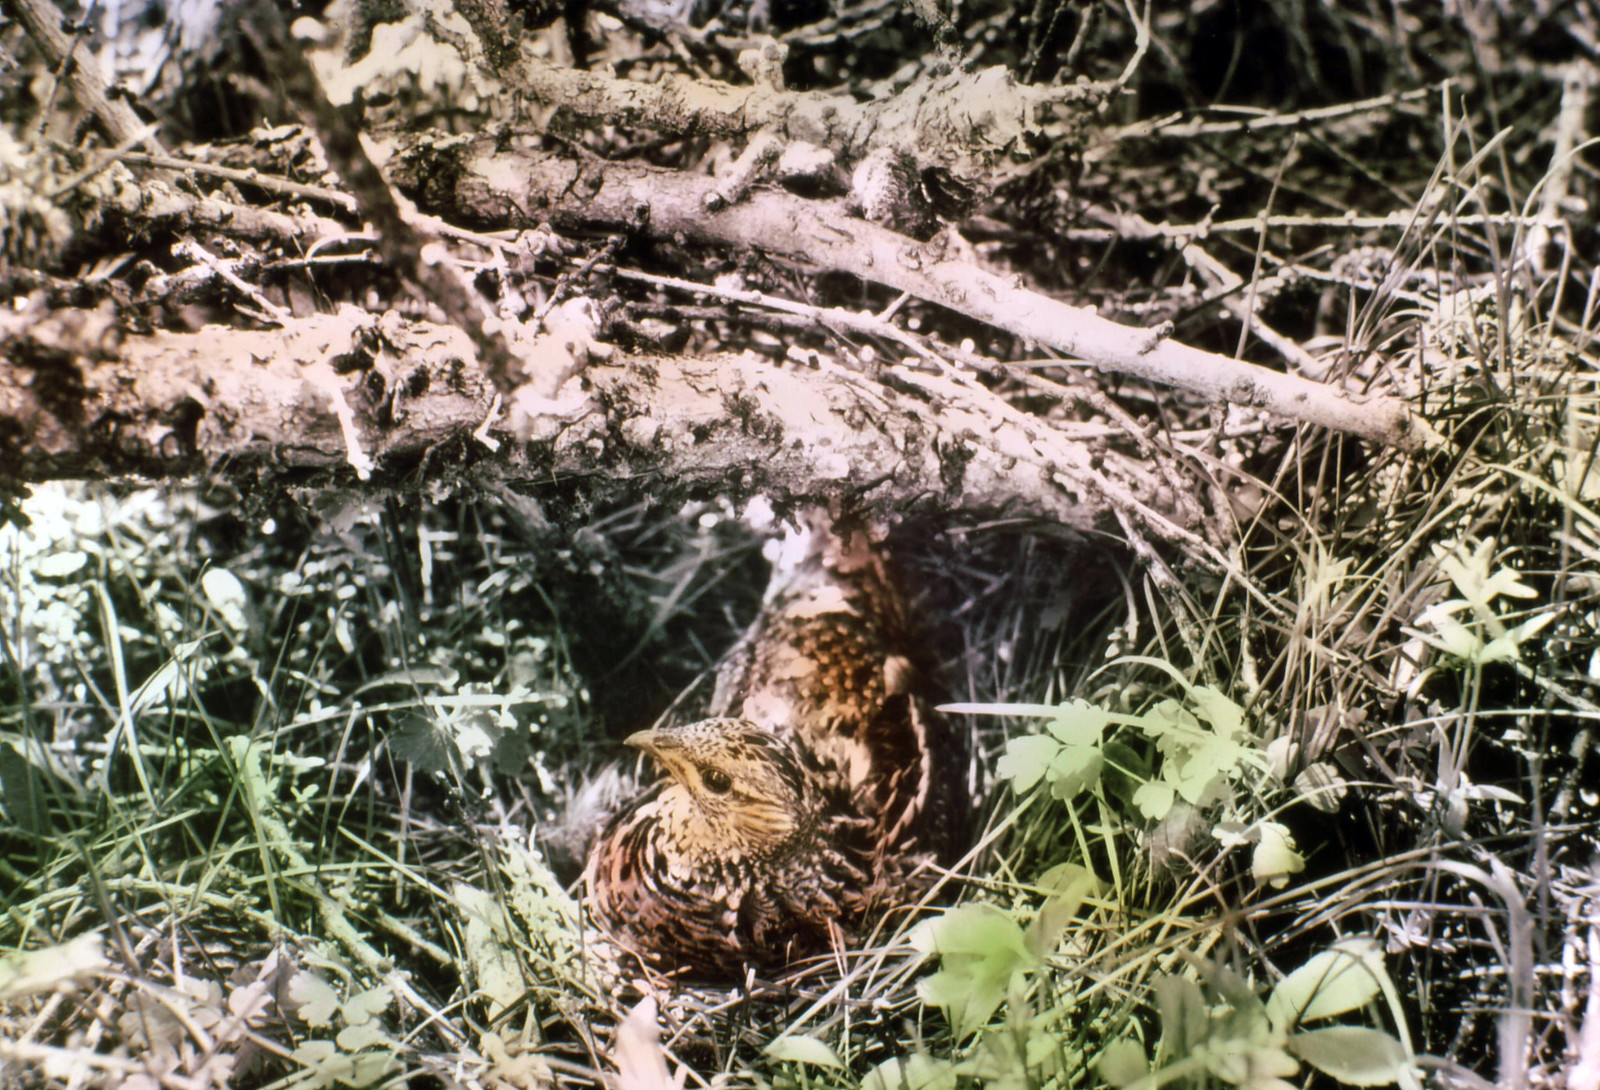 375580 Ruffed Grouse on Nest, Malheur NF 1938 | by Forest Service - Pacific Northwest